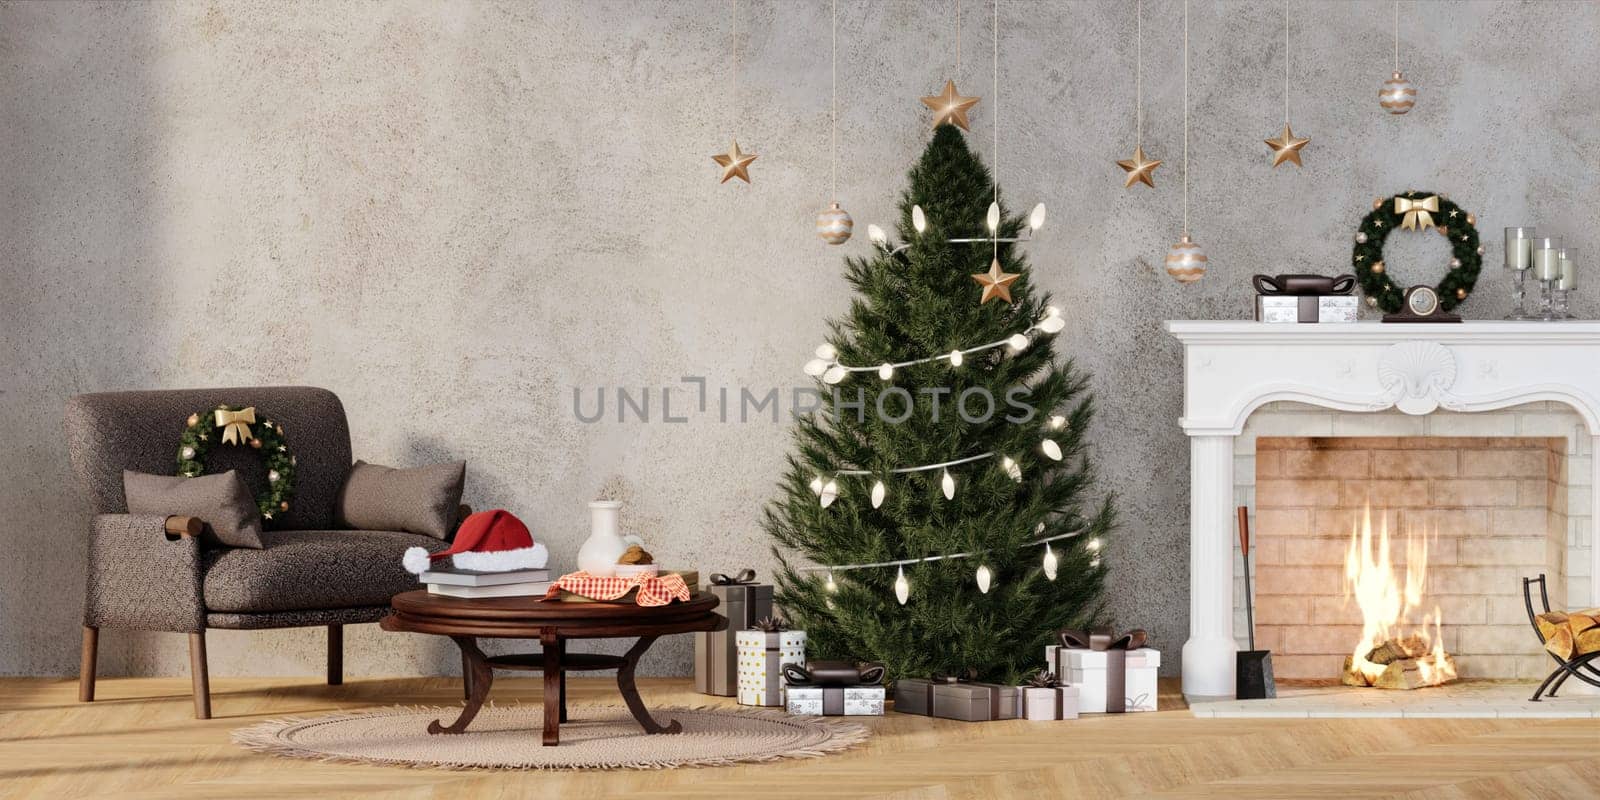 Christmas living room with a christmas tree and presents under it - modern classic style, 3D render, 3D illustration by meepiangraphic